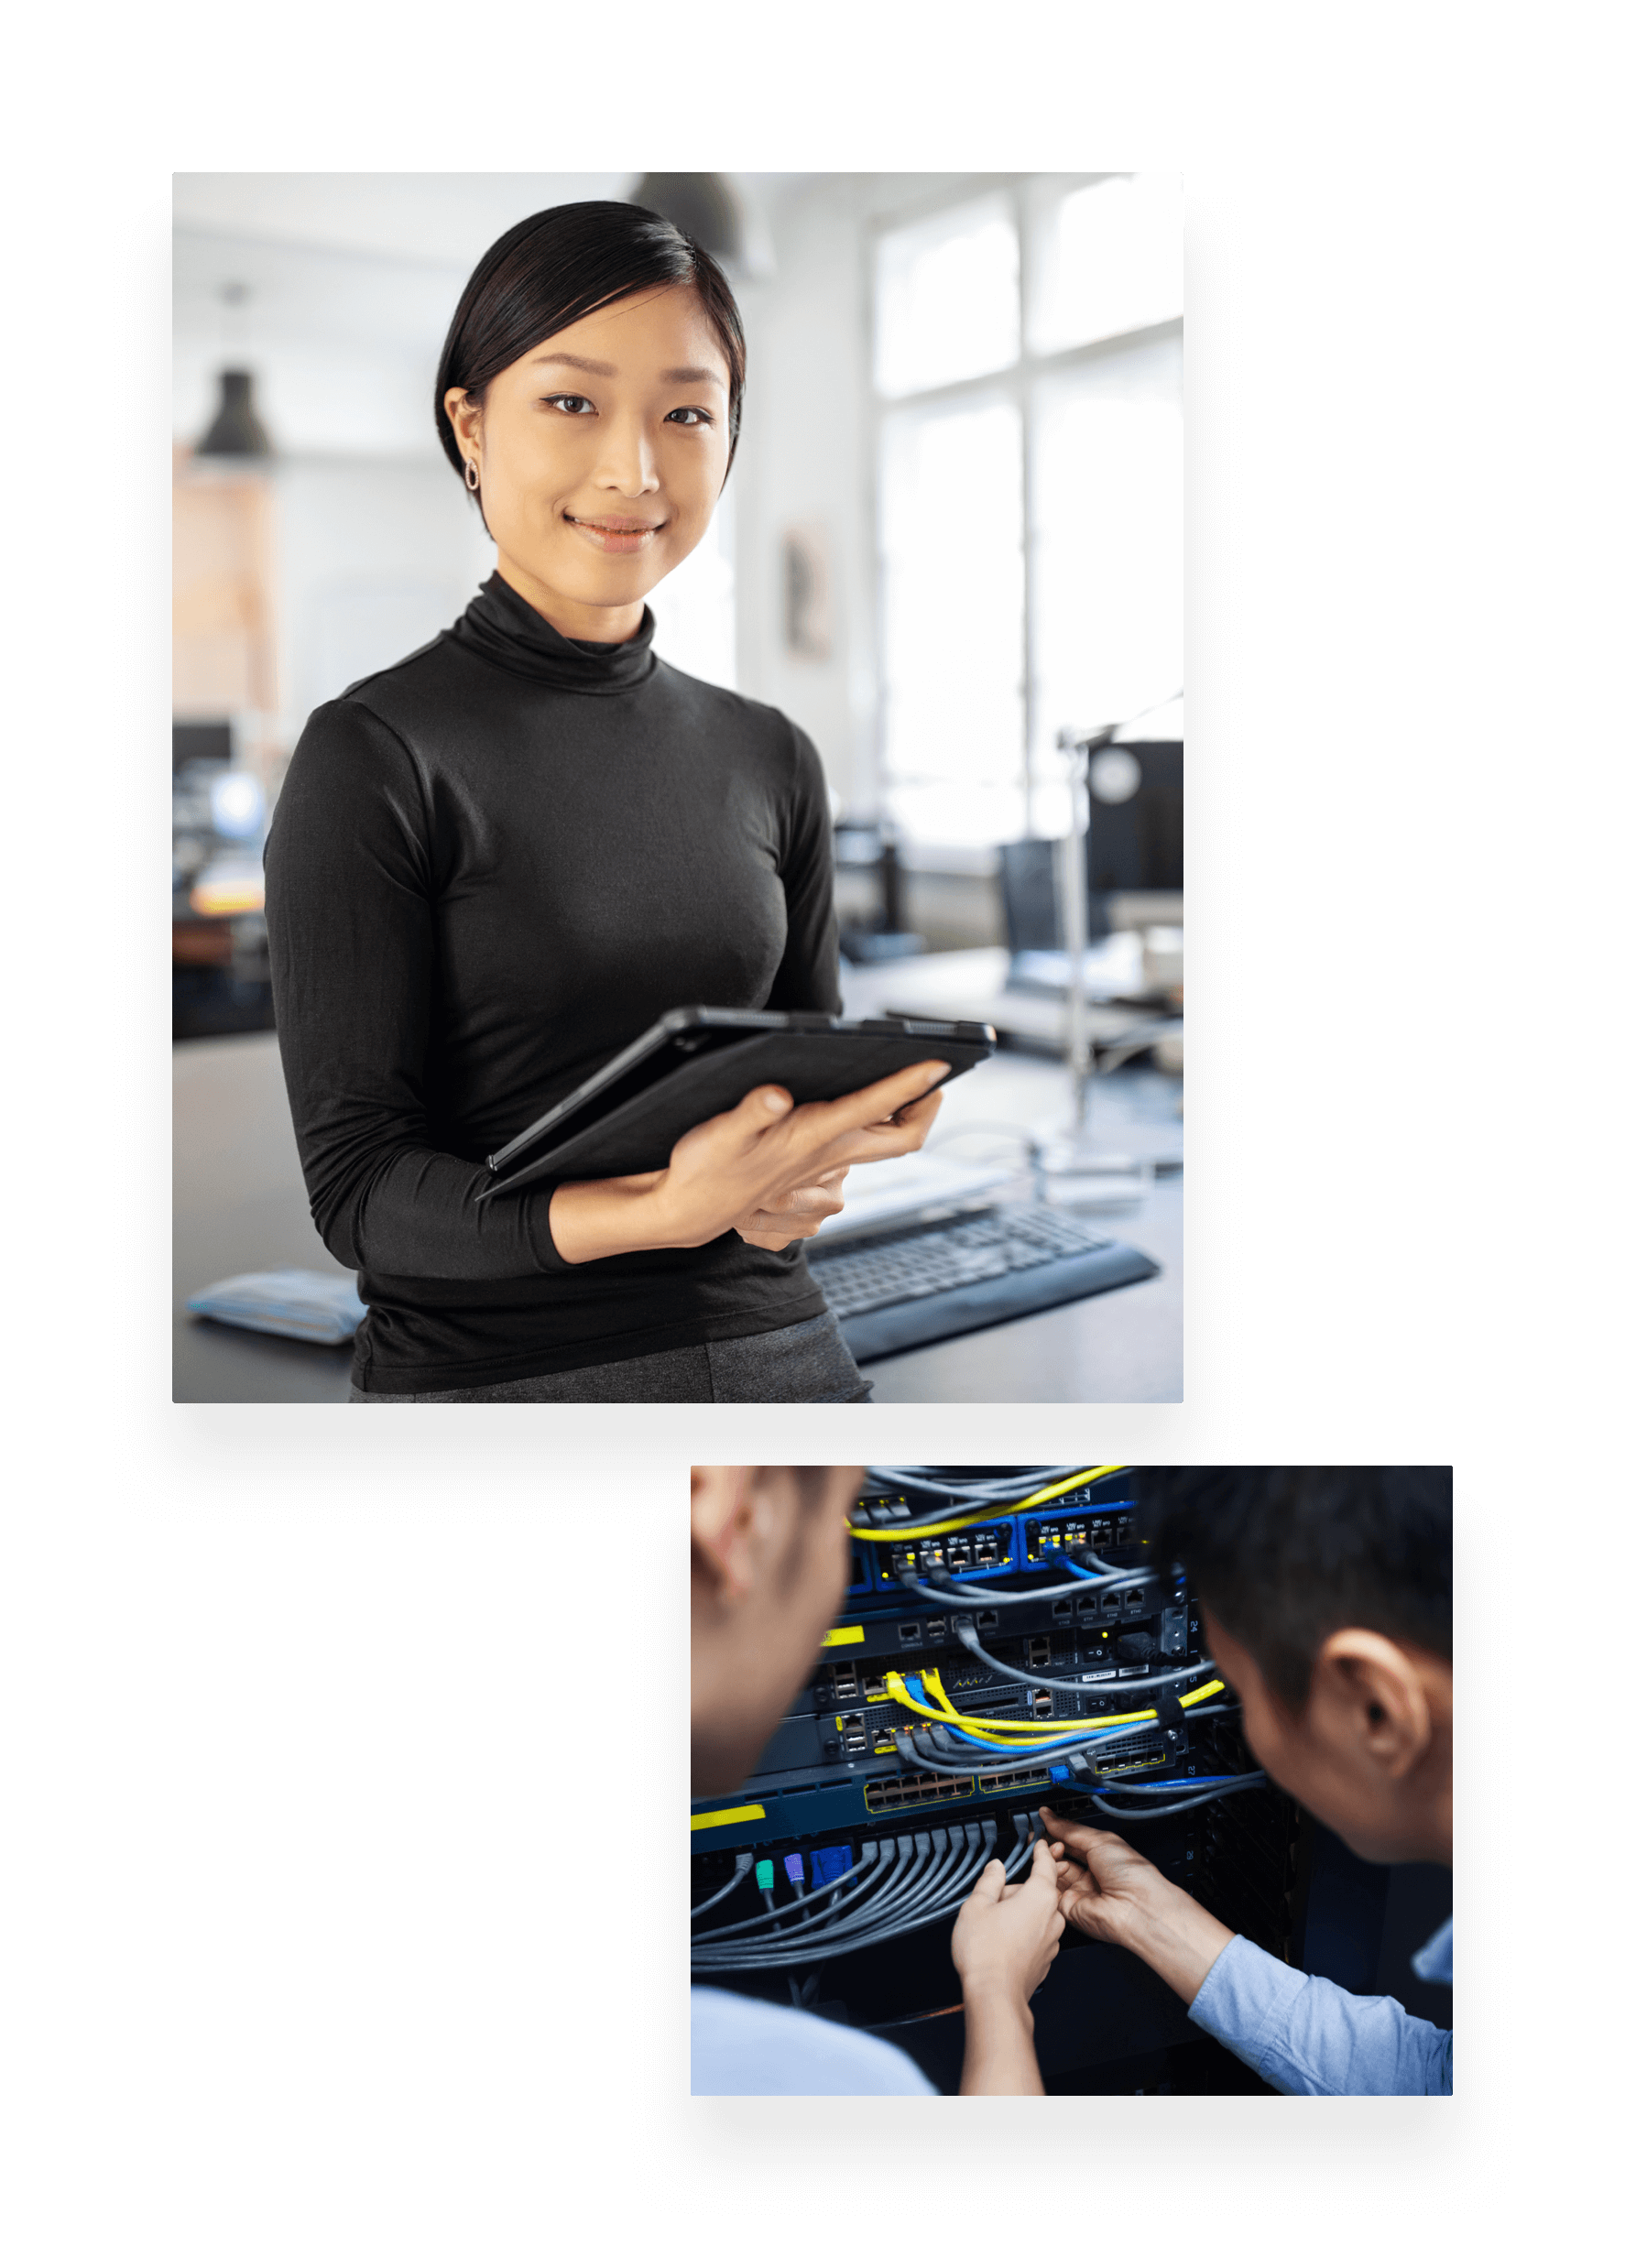 Collage photos of a network engineers and a business woman holding a tablet